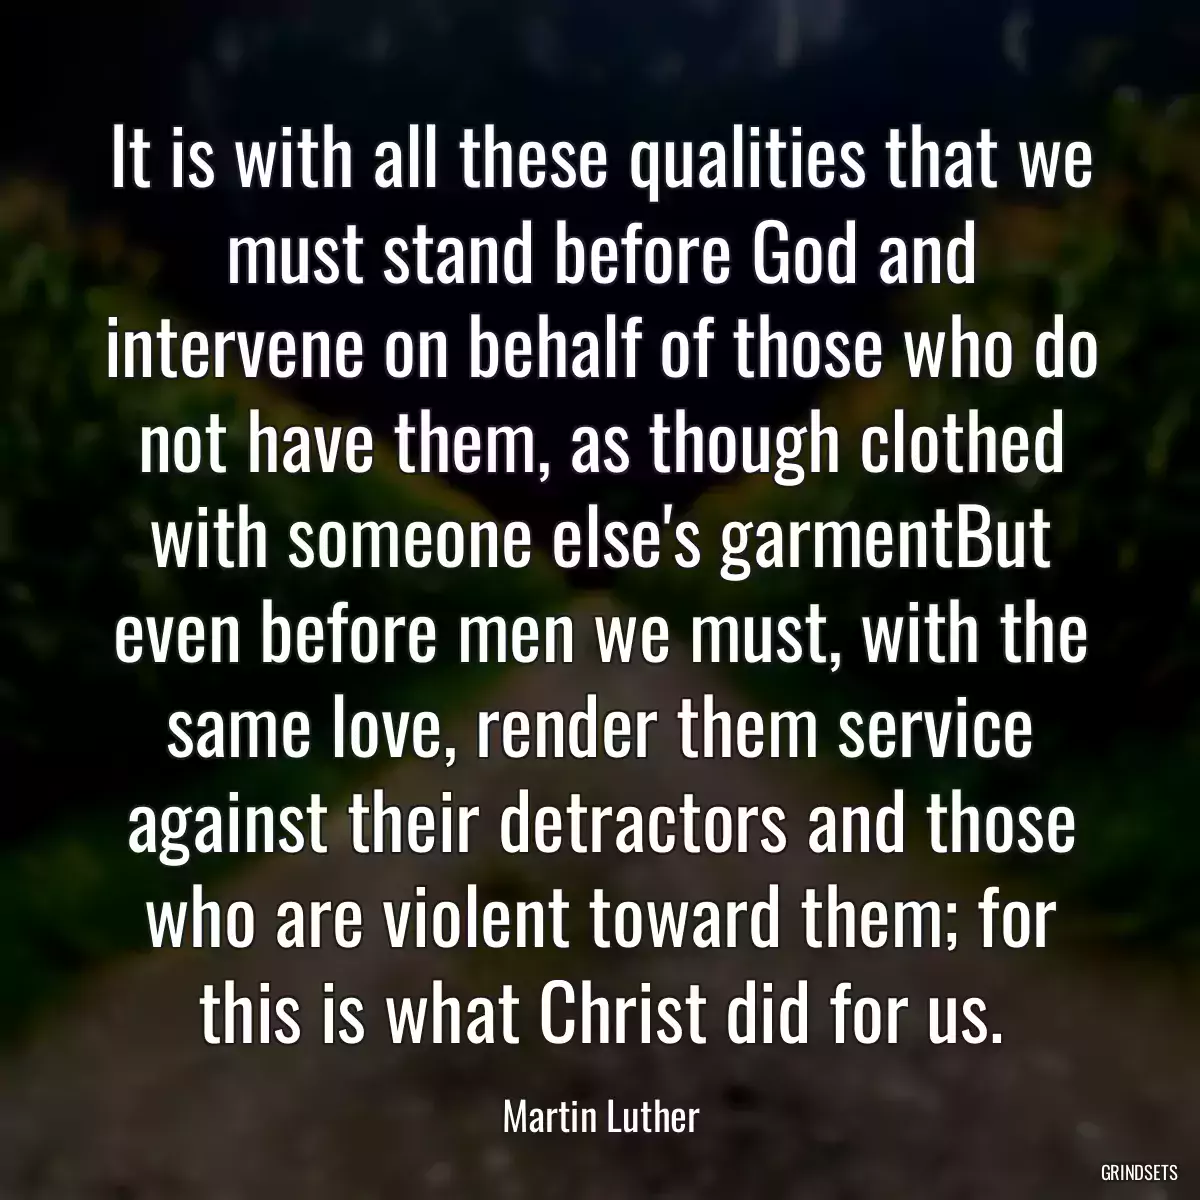 It is with all these qualities that we must stand before God and intervene on behalf of those who do not have them, as though clothed with someone else\'s garmentBut even before men we must, with the same love, render them service against their detractors and those who are violent toward them; for this is what Christ did for us.